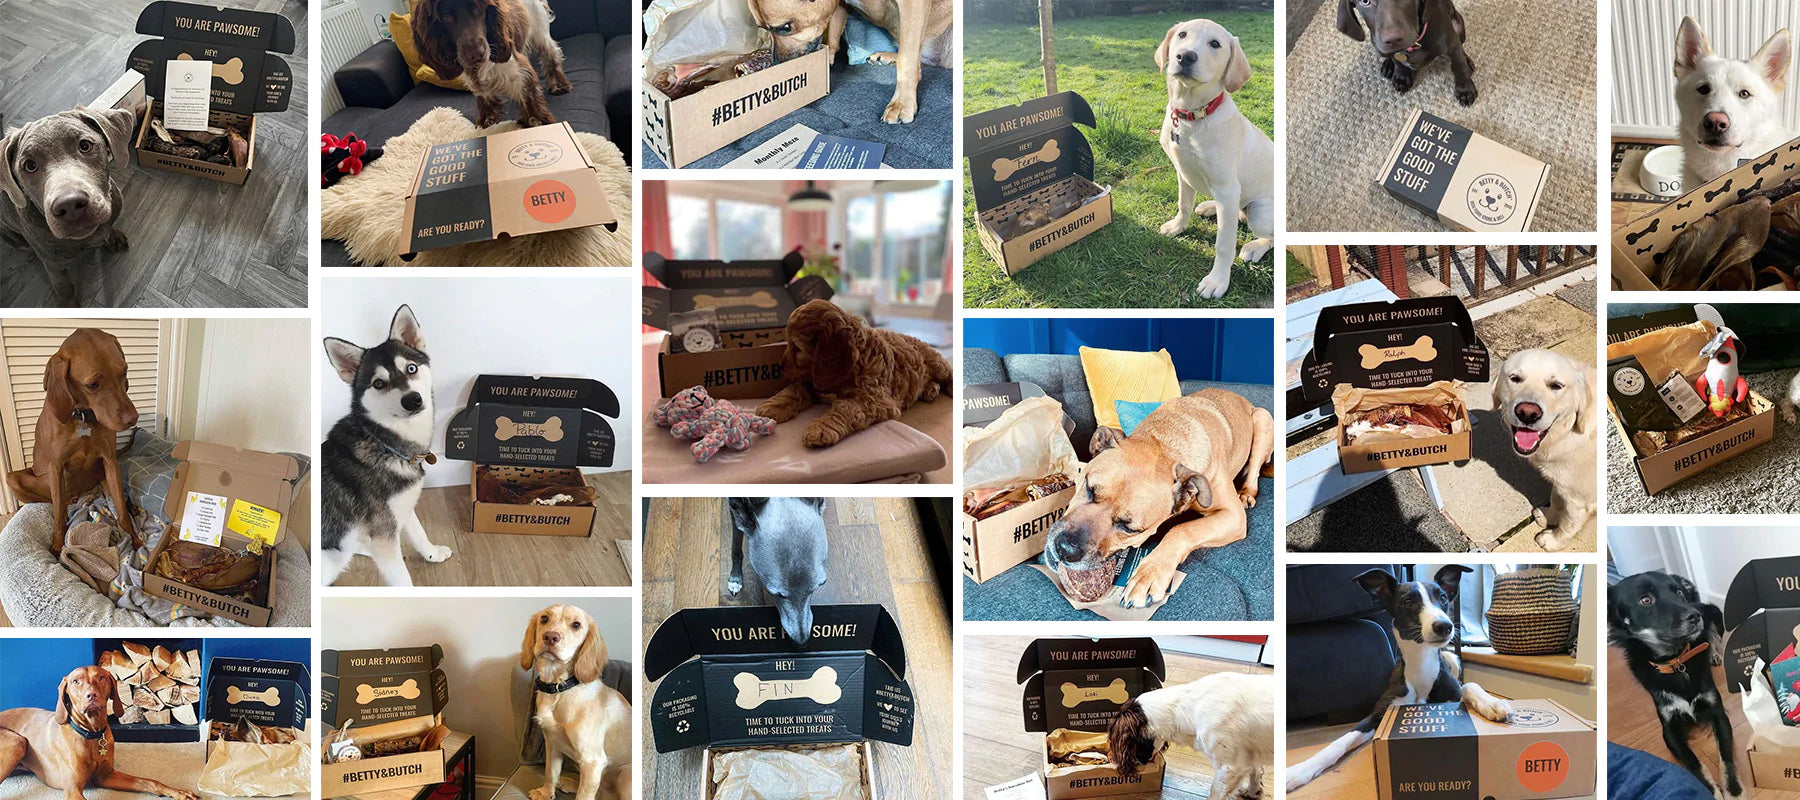 Betty and Butch UK dog deli treat boxes are 100% natural and human-grade quality dog food and treats.